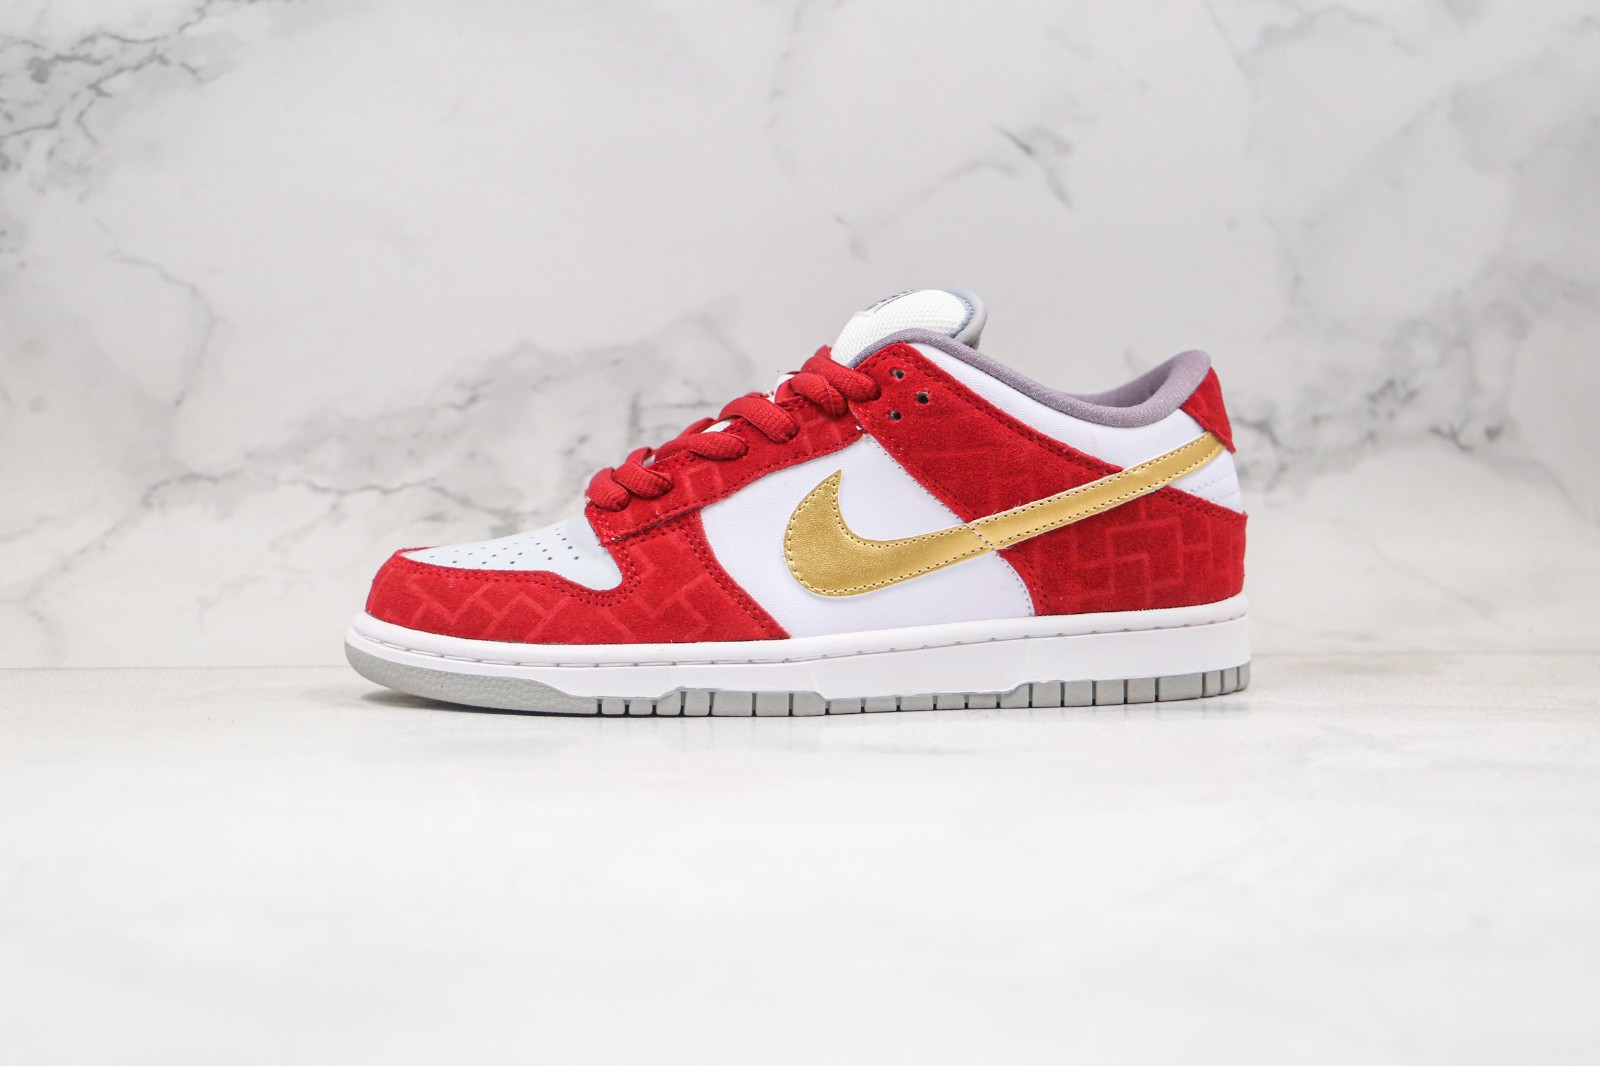 Baby Duiker Product 112 - nike id dunk high nfl draft picks 2019 by position -  MultiscaleconsultingShops - Nike SB Dunk Low Shanghai White Metallic Gold  Redwood 304292